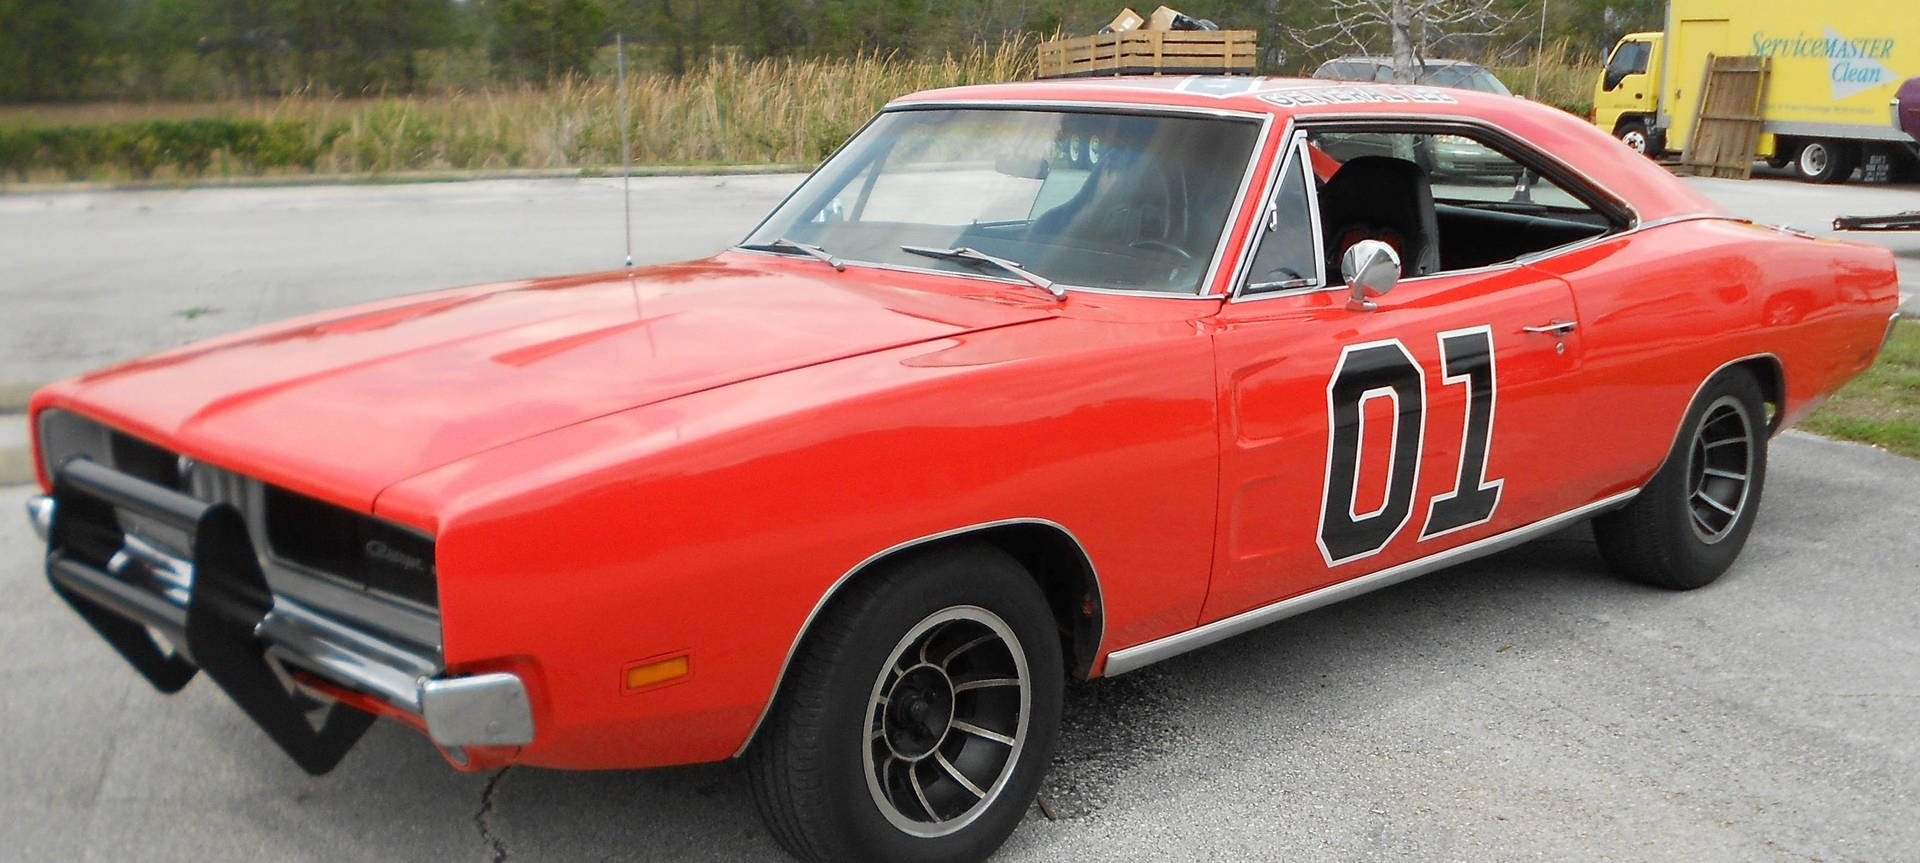 The General Lee – The Iconic Car Featured in The TV Series "Dukes of Hazzard" Wallpaper